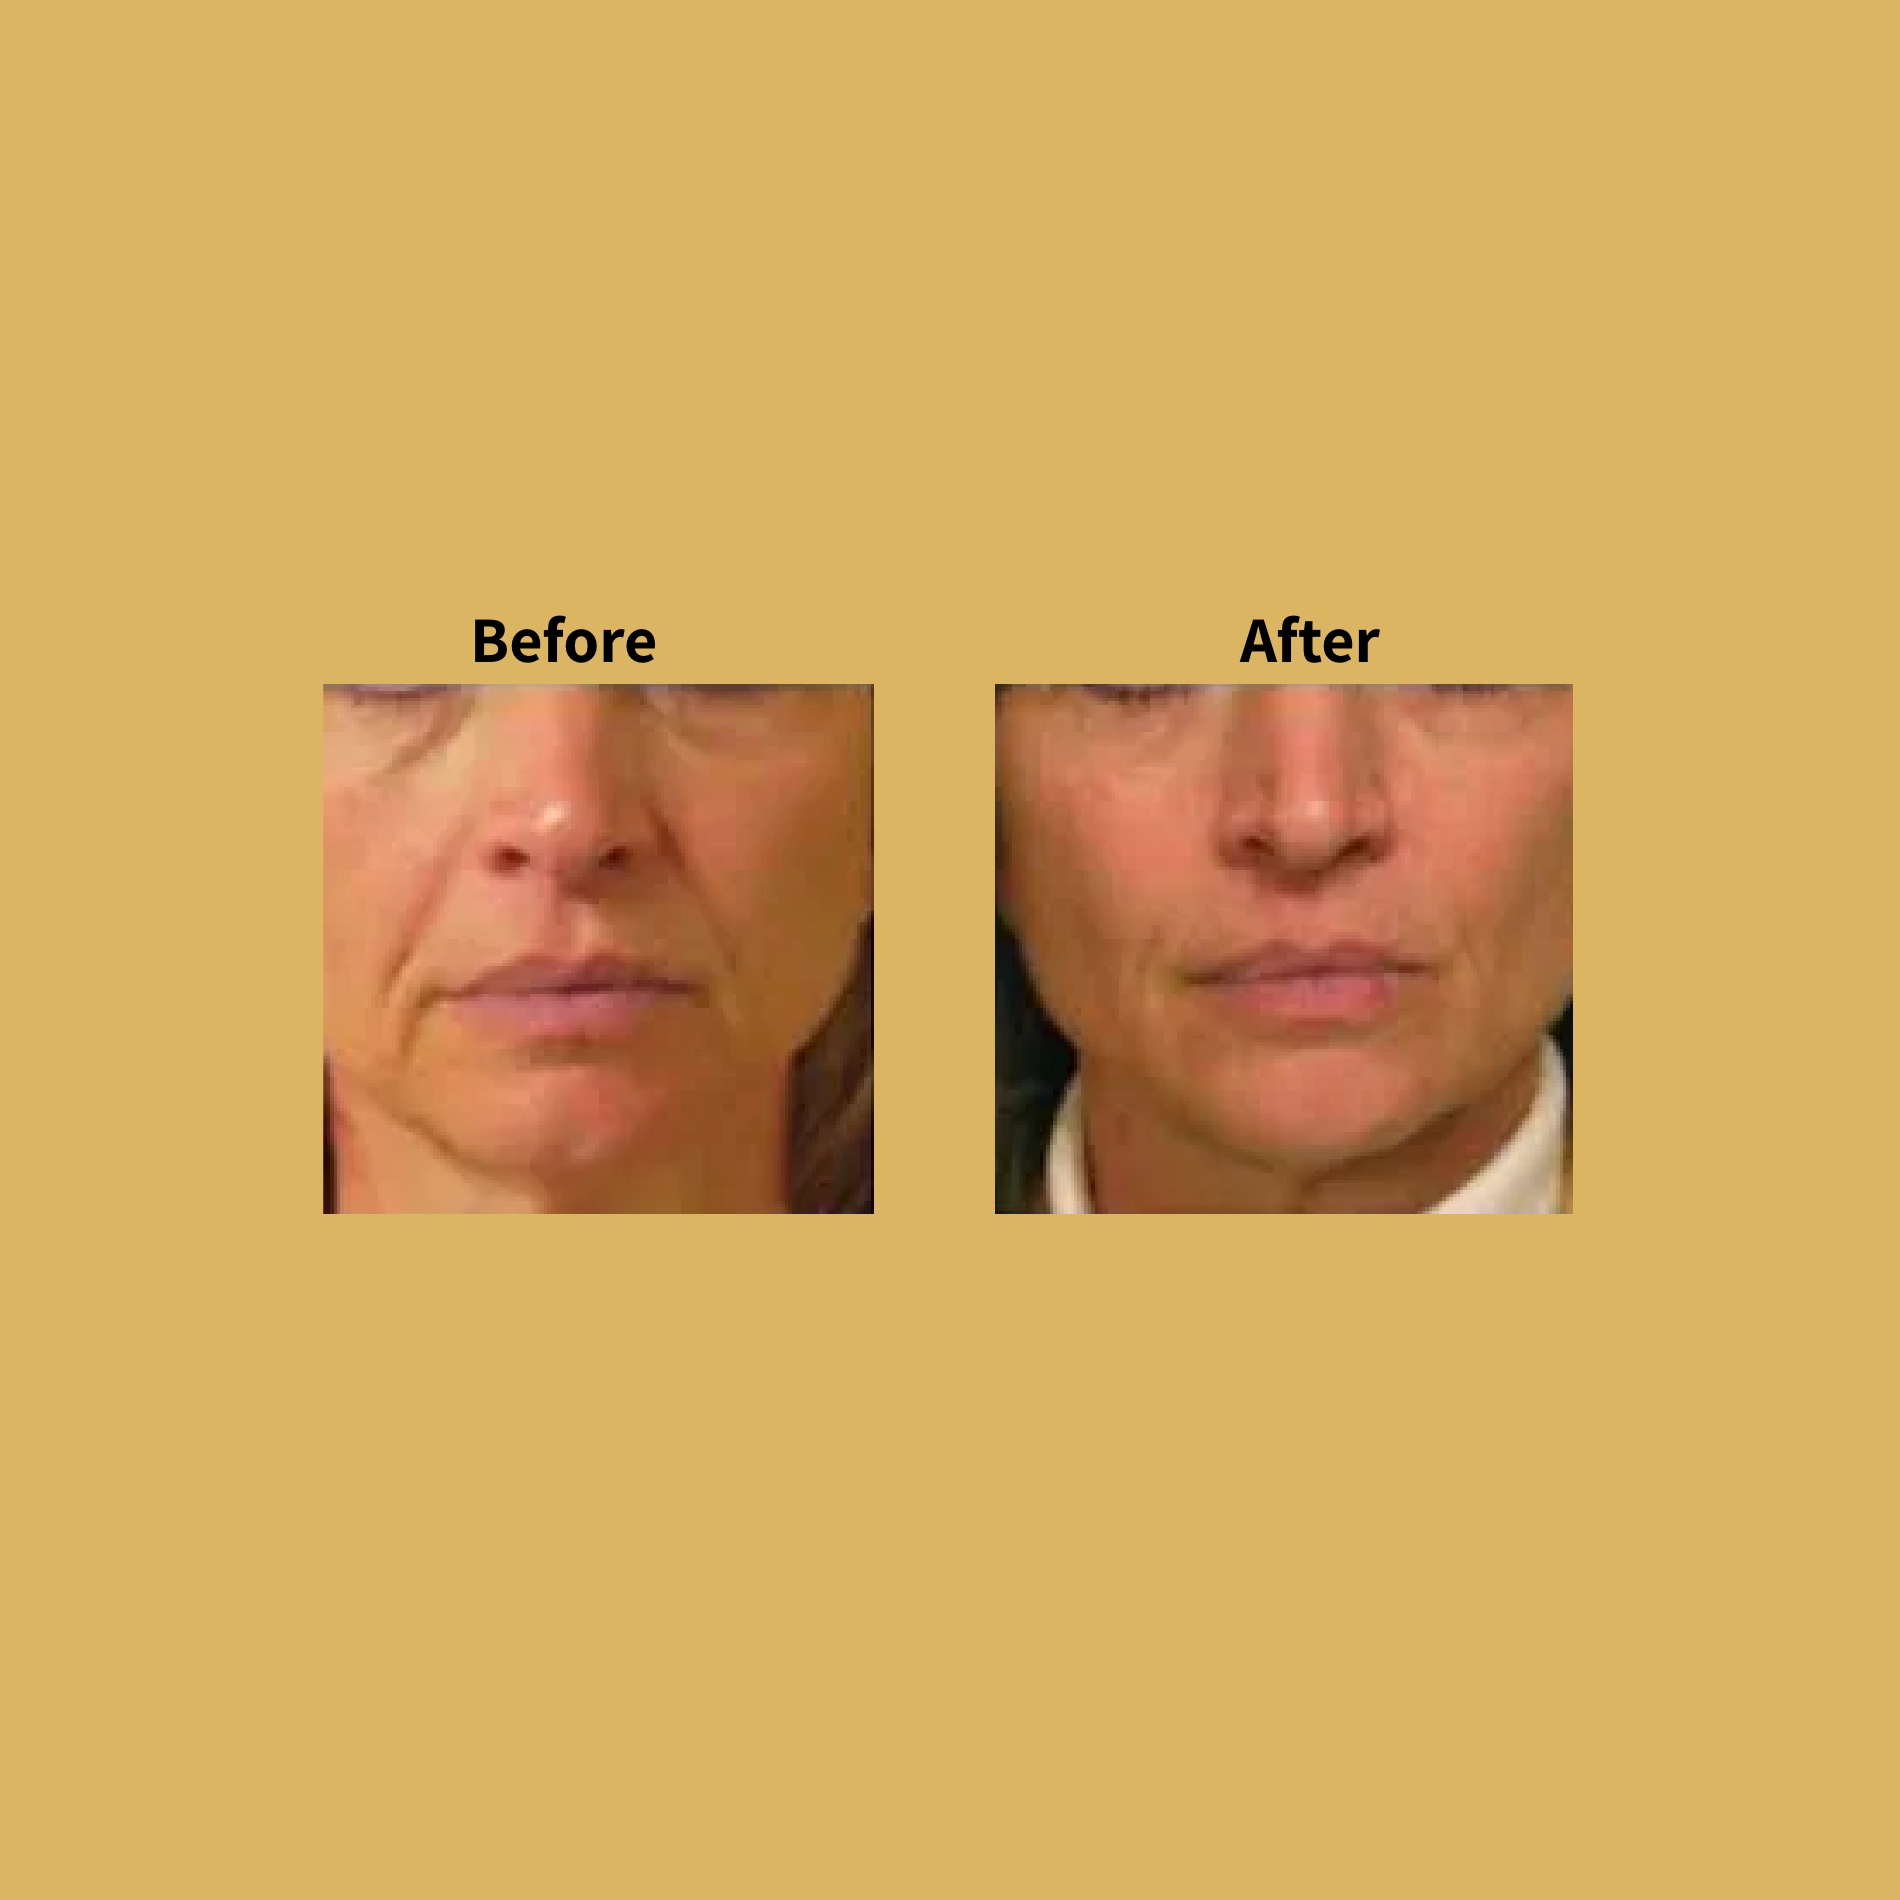 Titan Non-Surgical Facelift Before and After Treatment Photos | Soleil Medical & Beauty Spa in Portland, OR